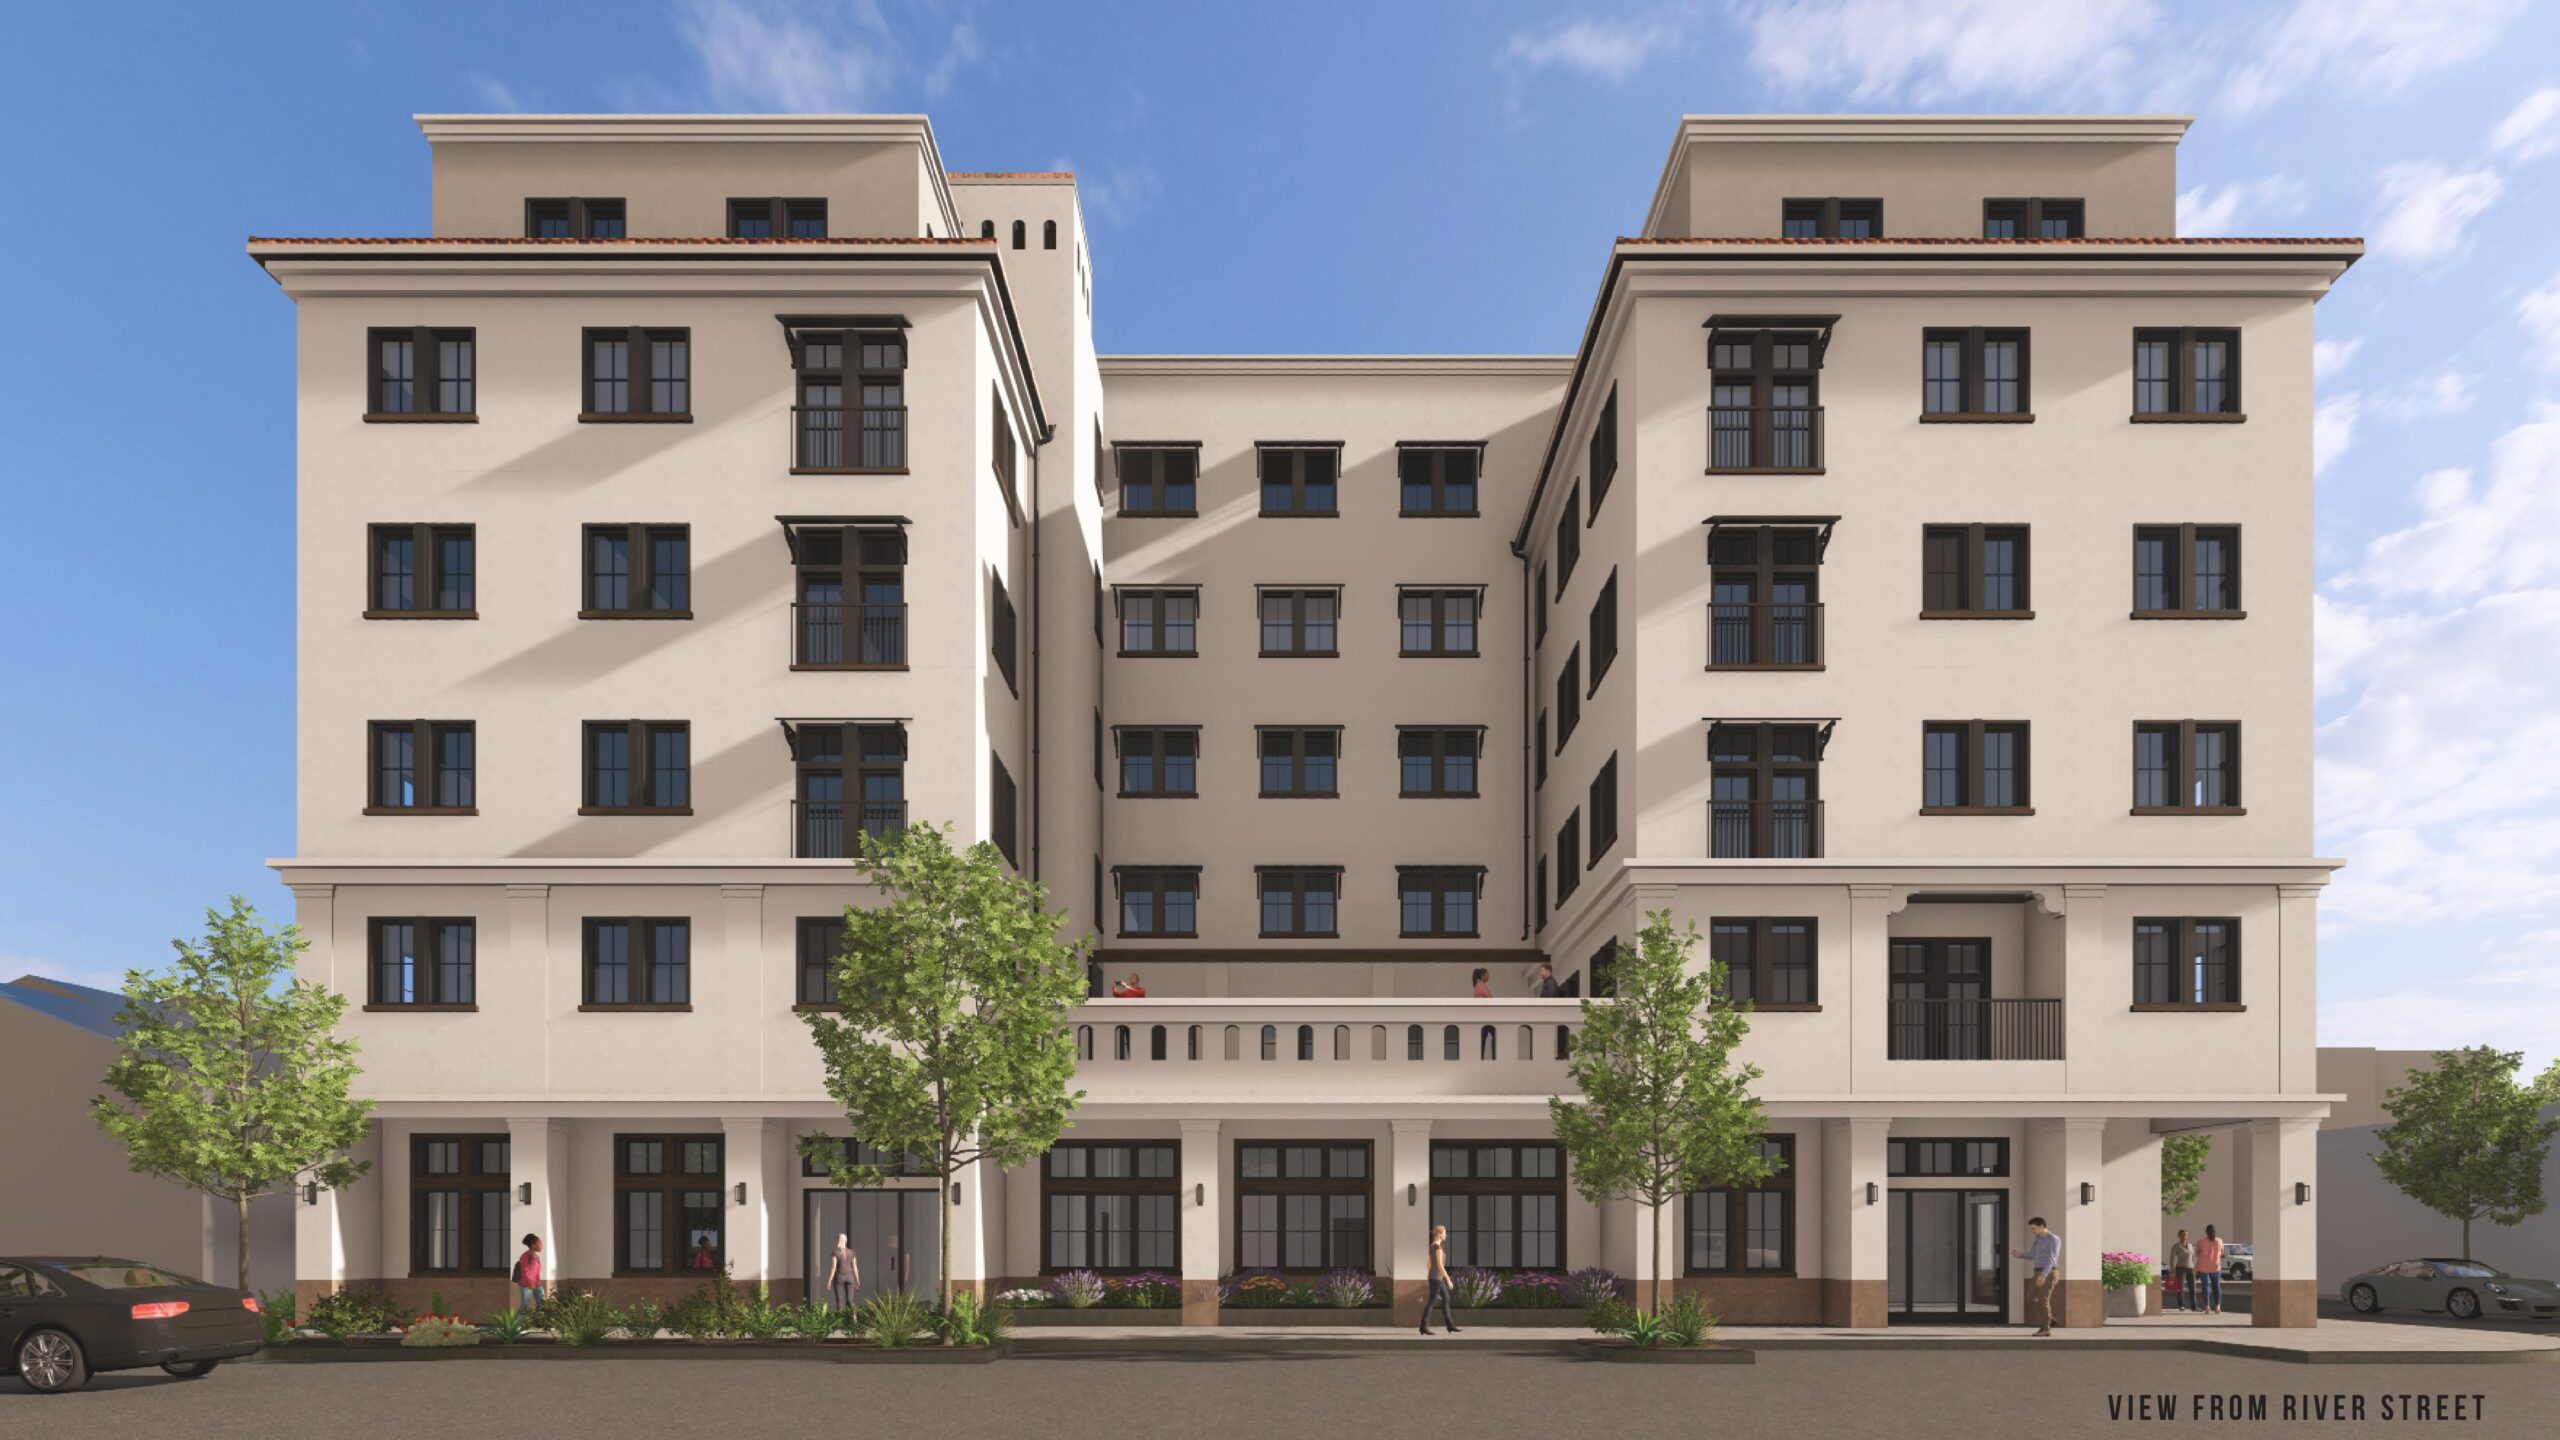 A rendering of the proposed six-story apartment complex.